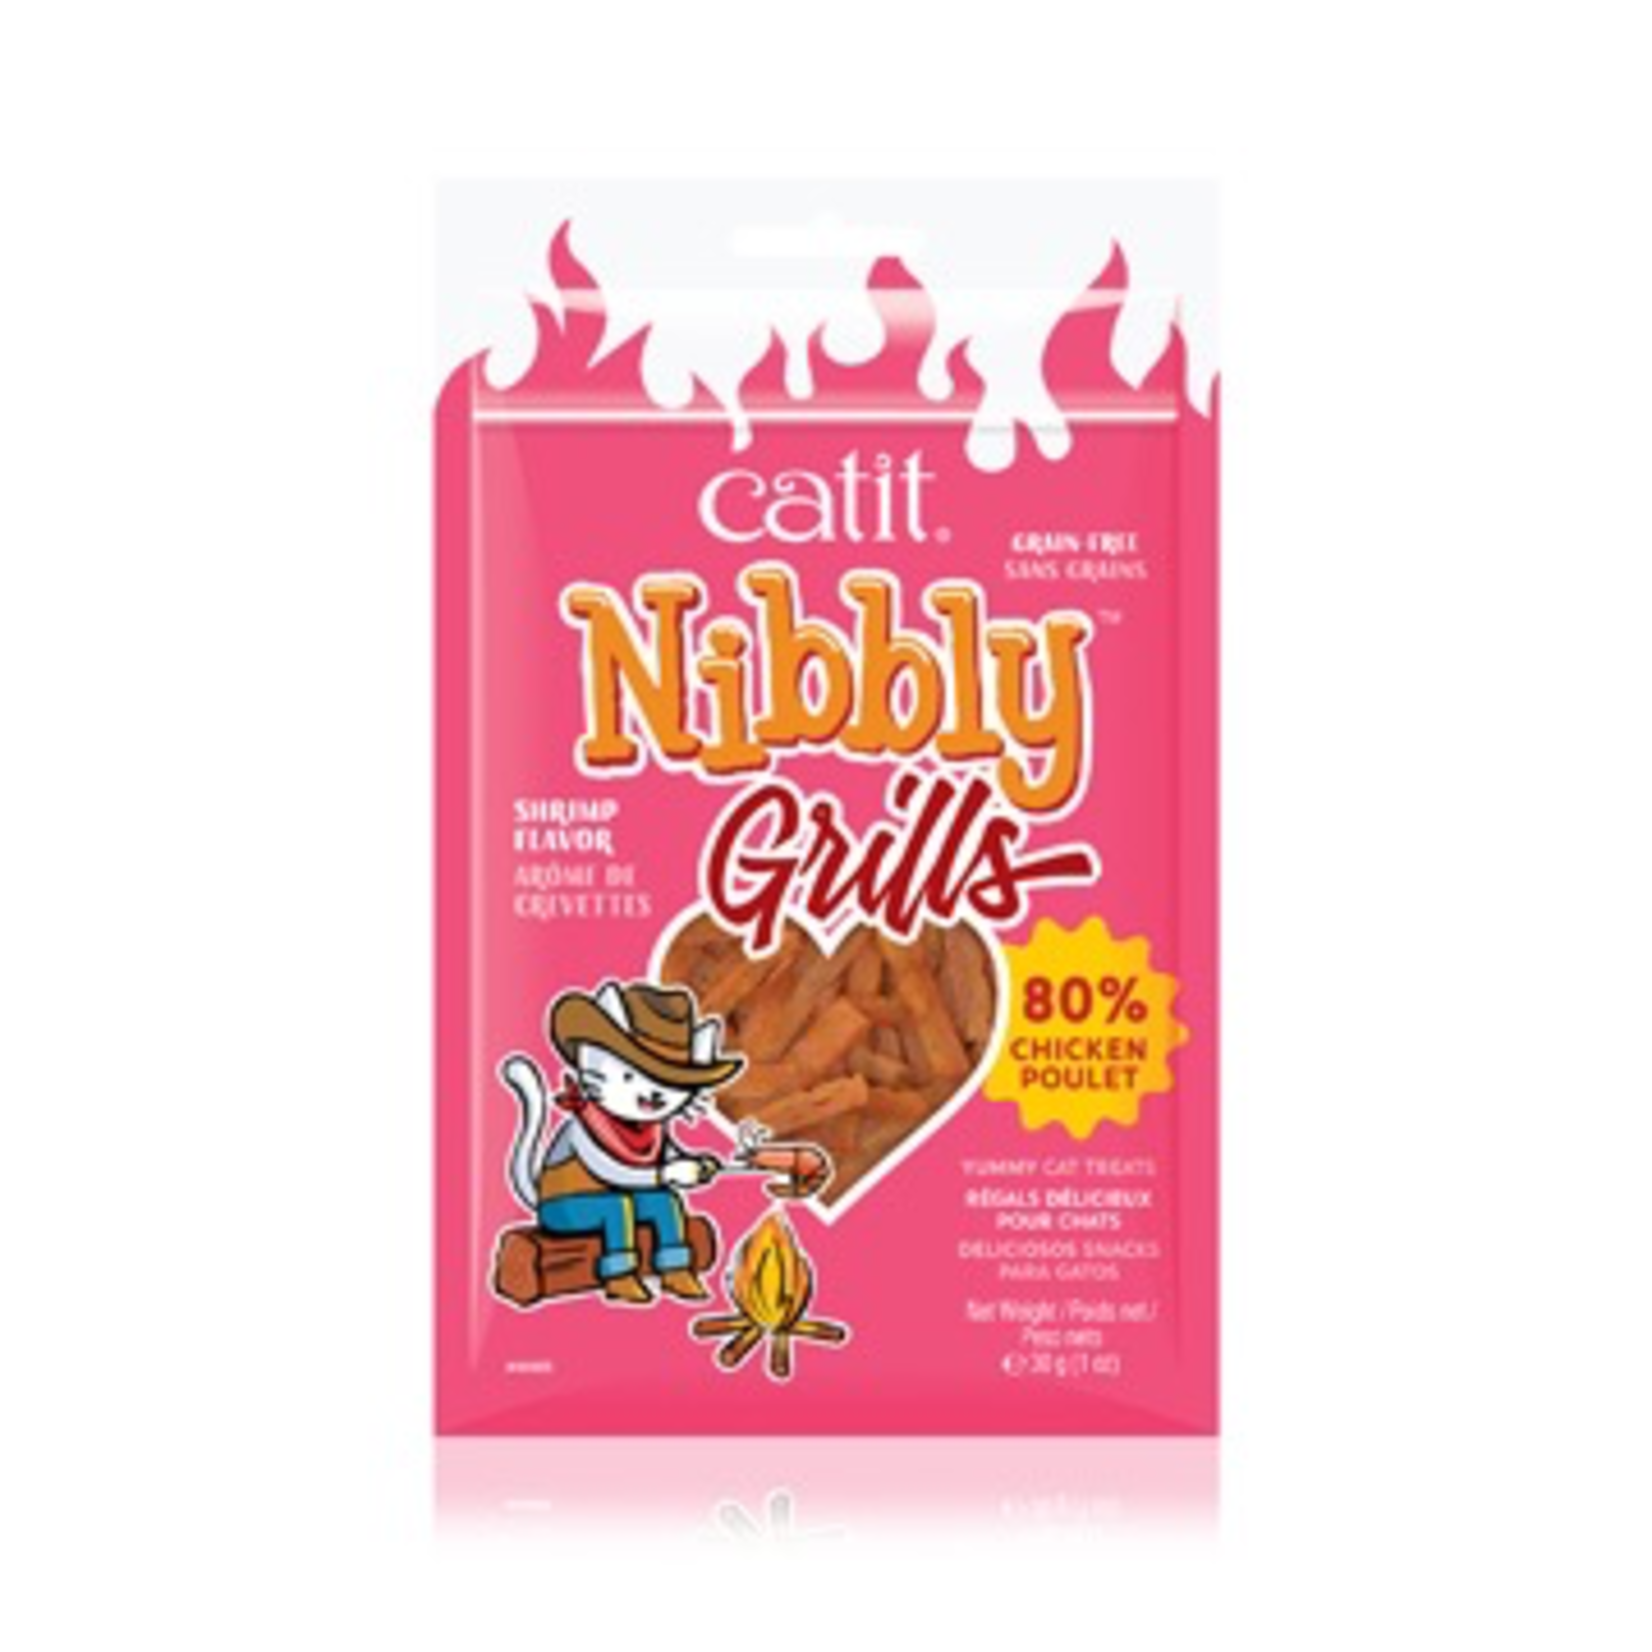 CAT IT Catit Nibbly Grills Chicken and Shrimp Flavour - 30 g (1 oz)